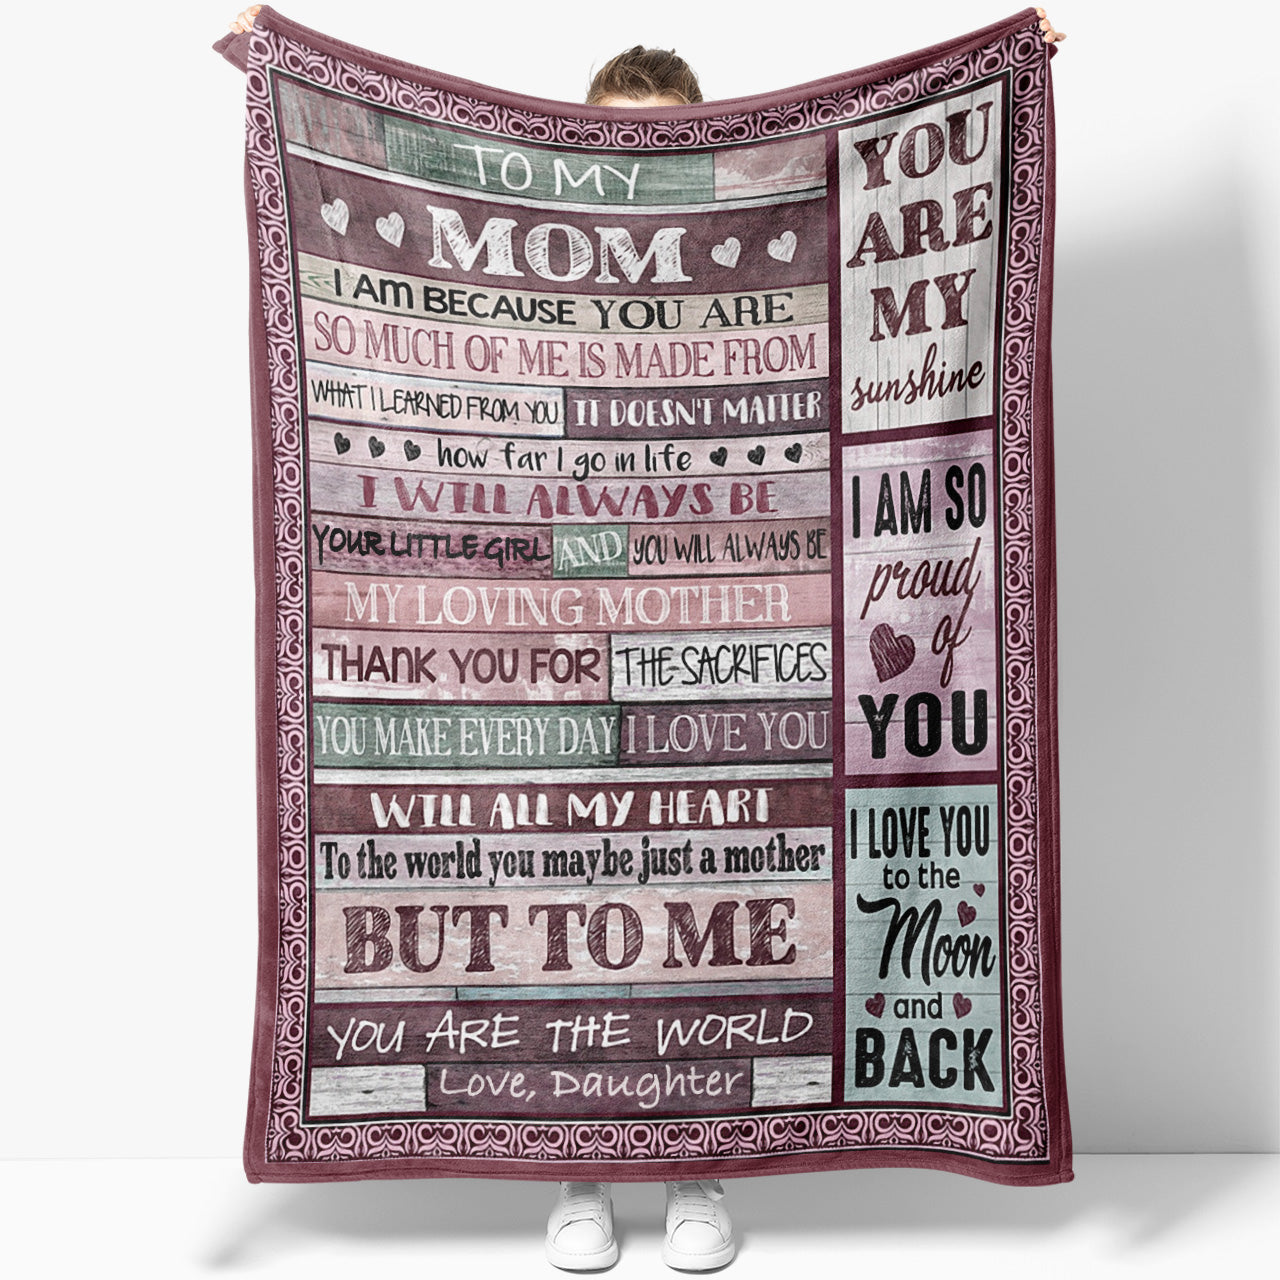 75 Good Christmas Gift Ideas for Mom & Mother in Law from Daughter | Christmas  presents for moms, Mother christmas gifts, Thoughtful christmas presents